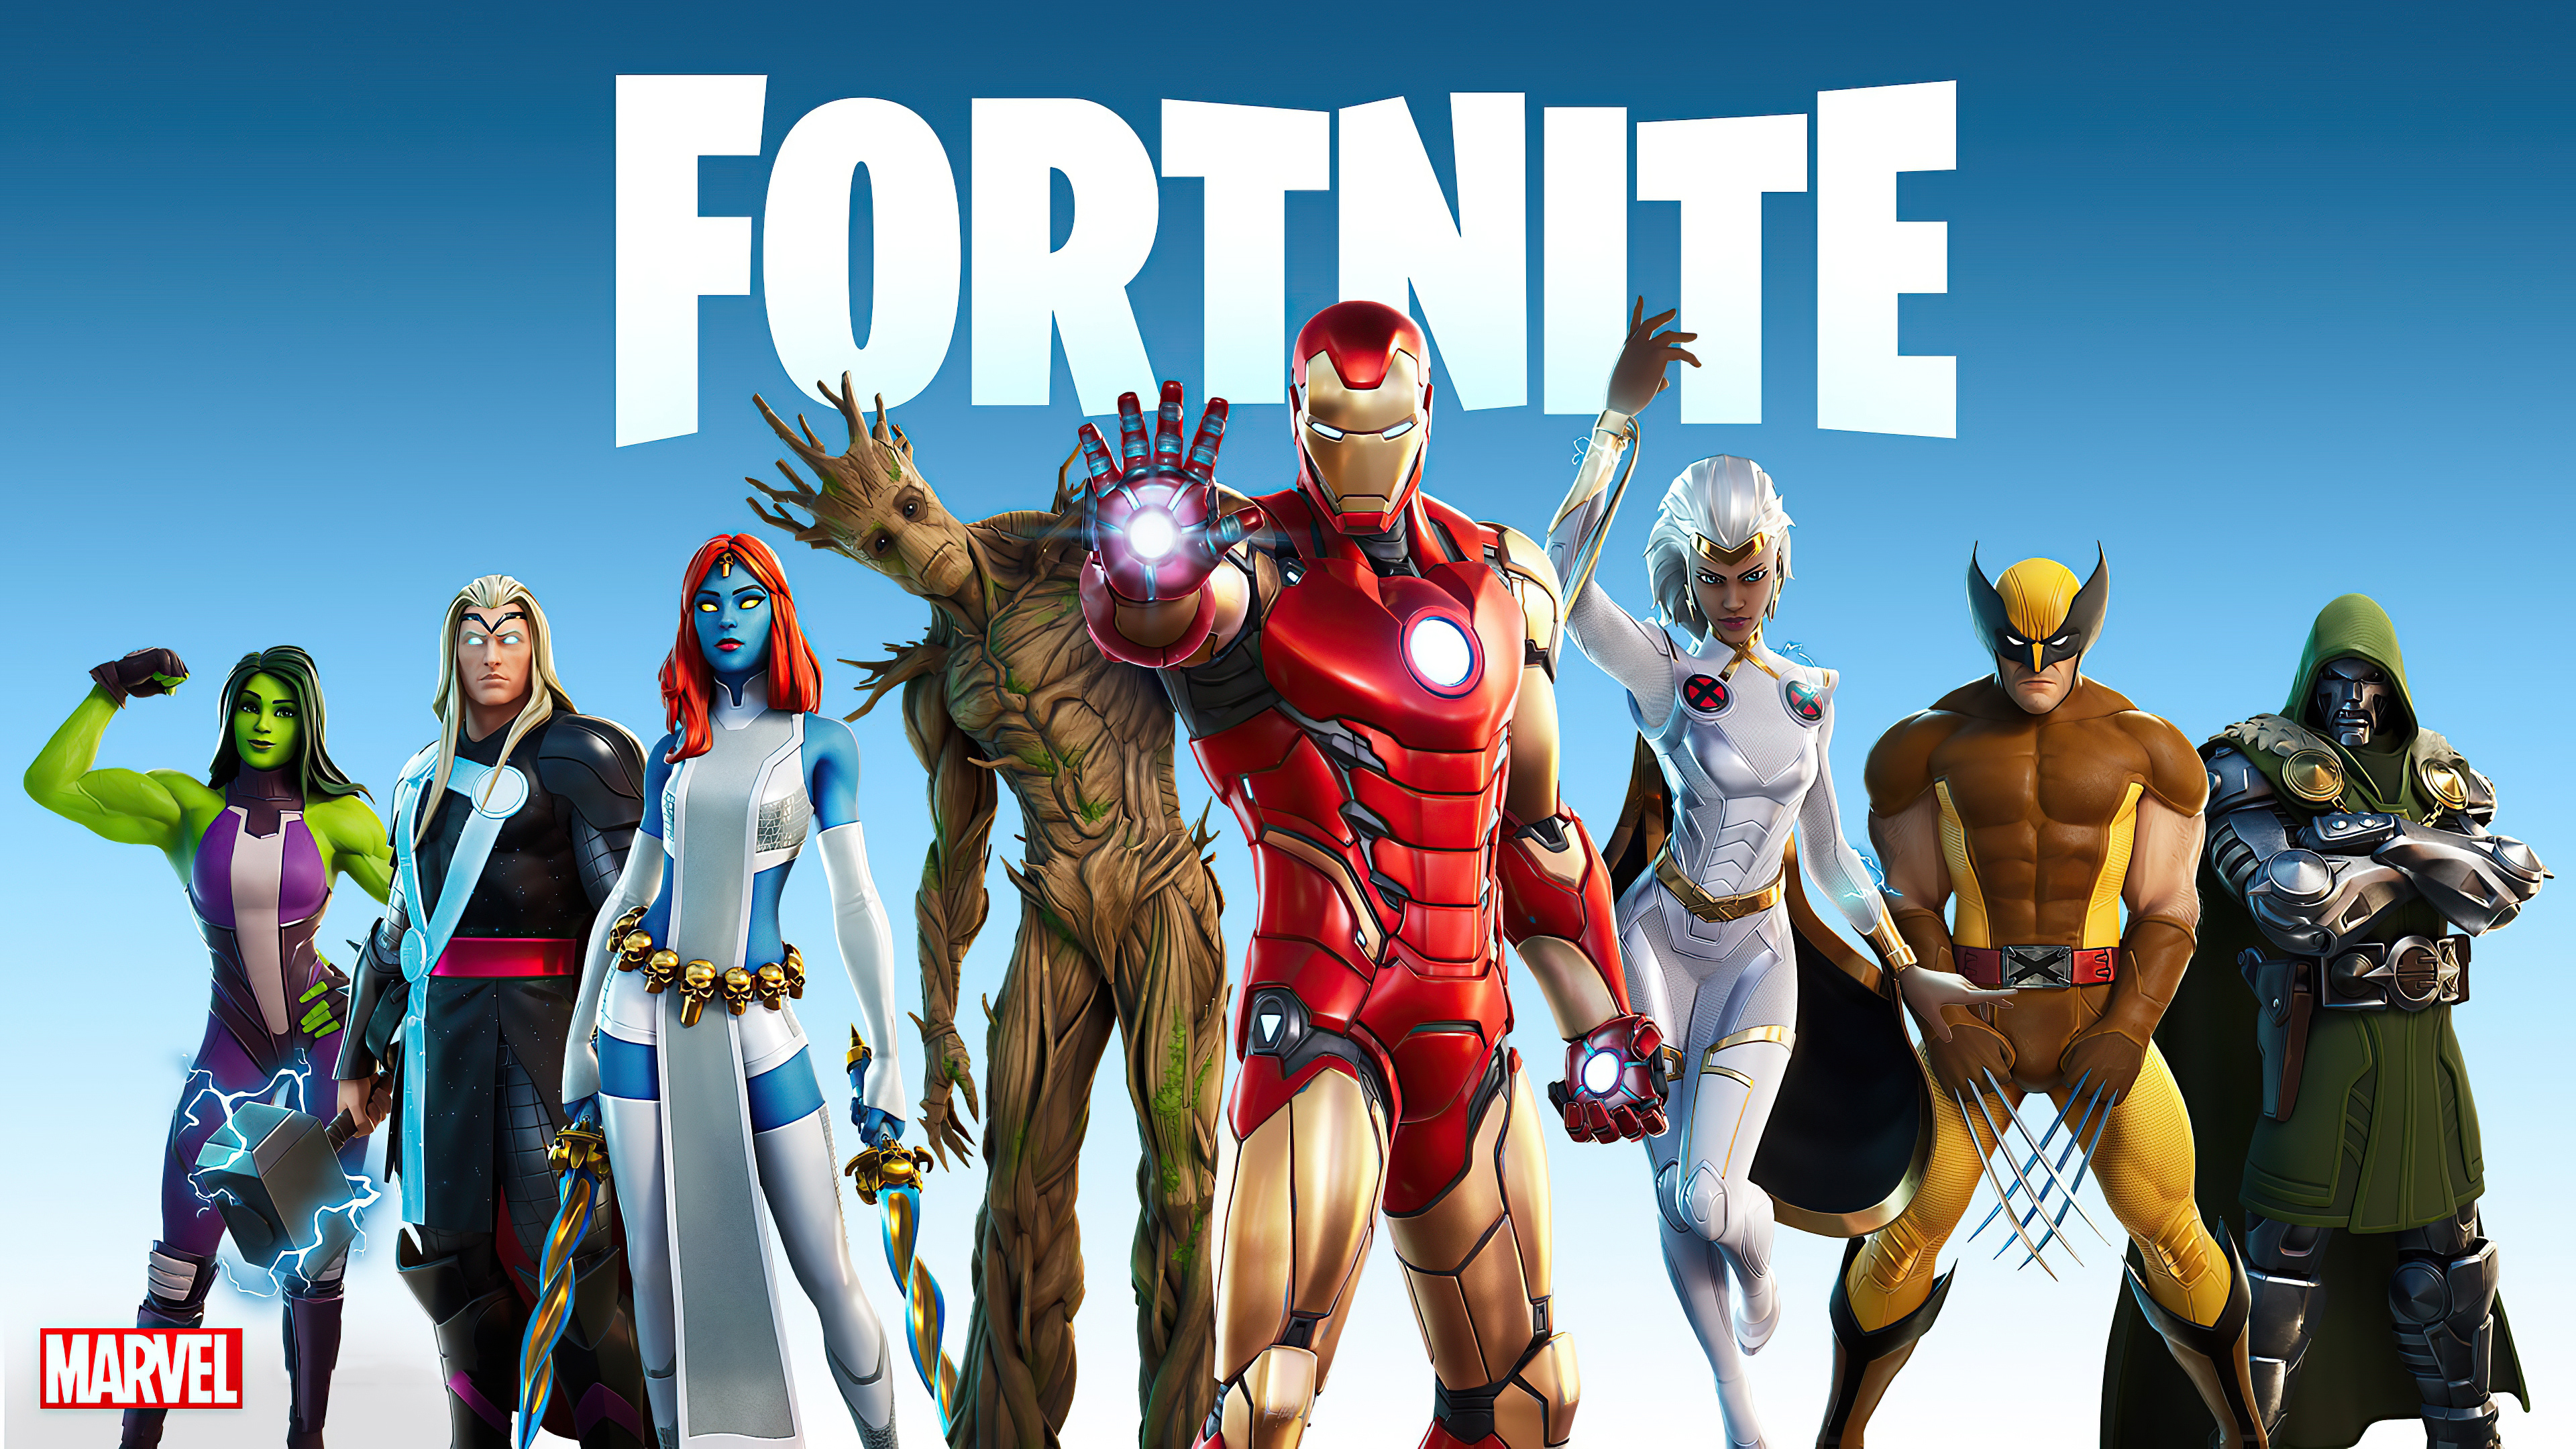 Fortnite is making a comeback on iOS in Europe through @EpicGames Store, thanks to DMA law. Watch out, @Apple!